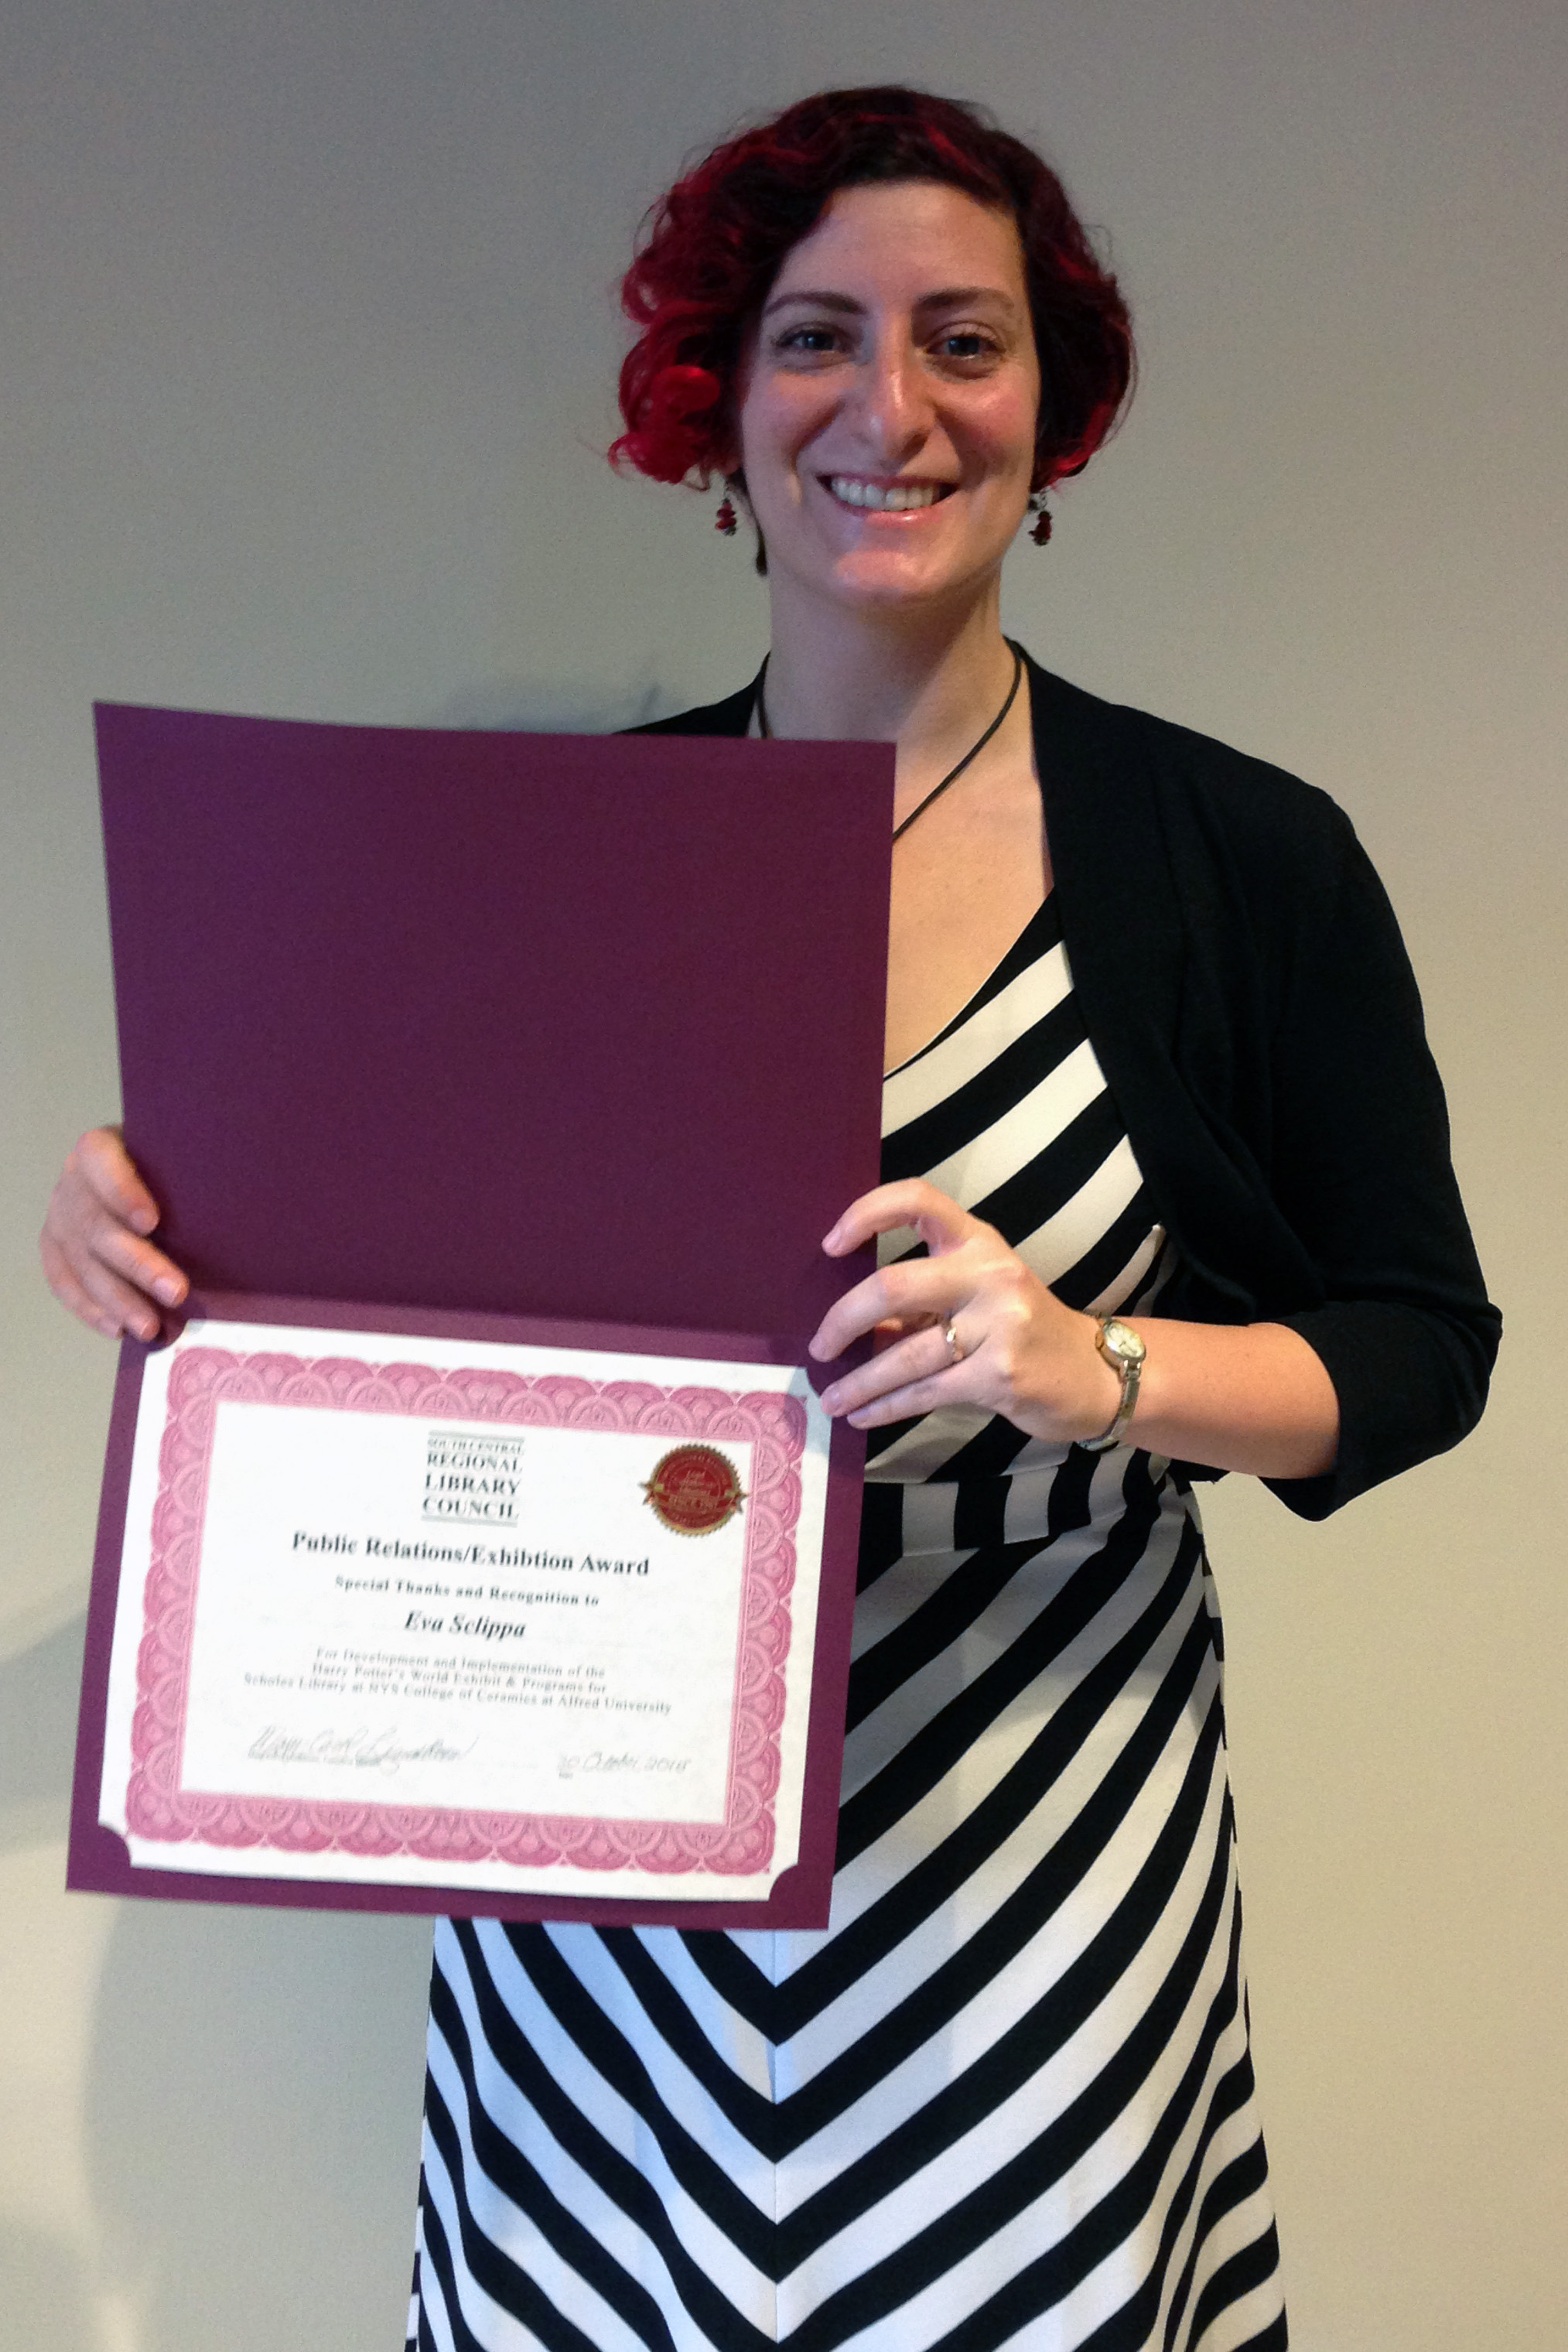 Eva Sclippa with her award from the SCRLC